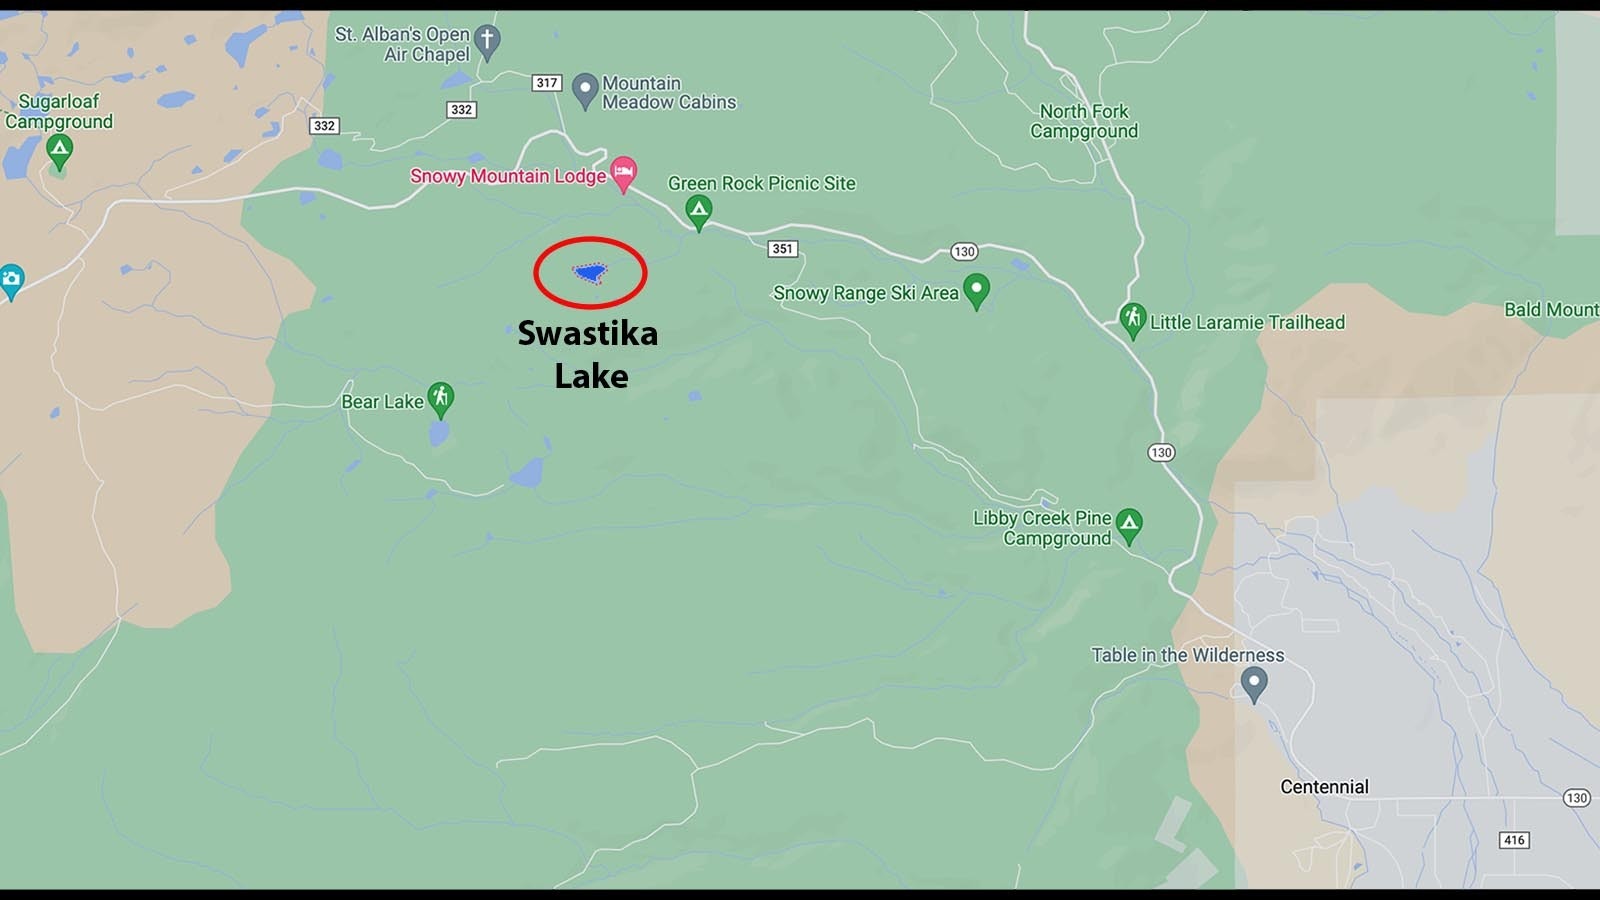 Swastika Lake is in the Medicine Bow National Forest northwest of Centennial off Highway 130.